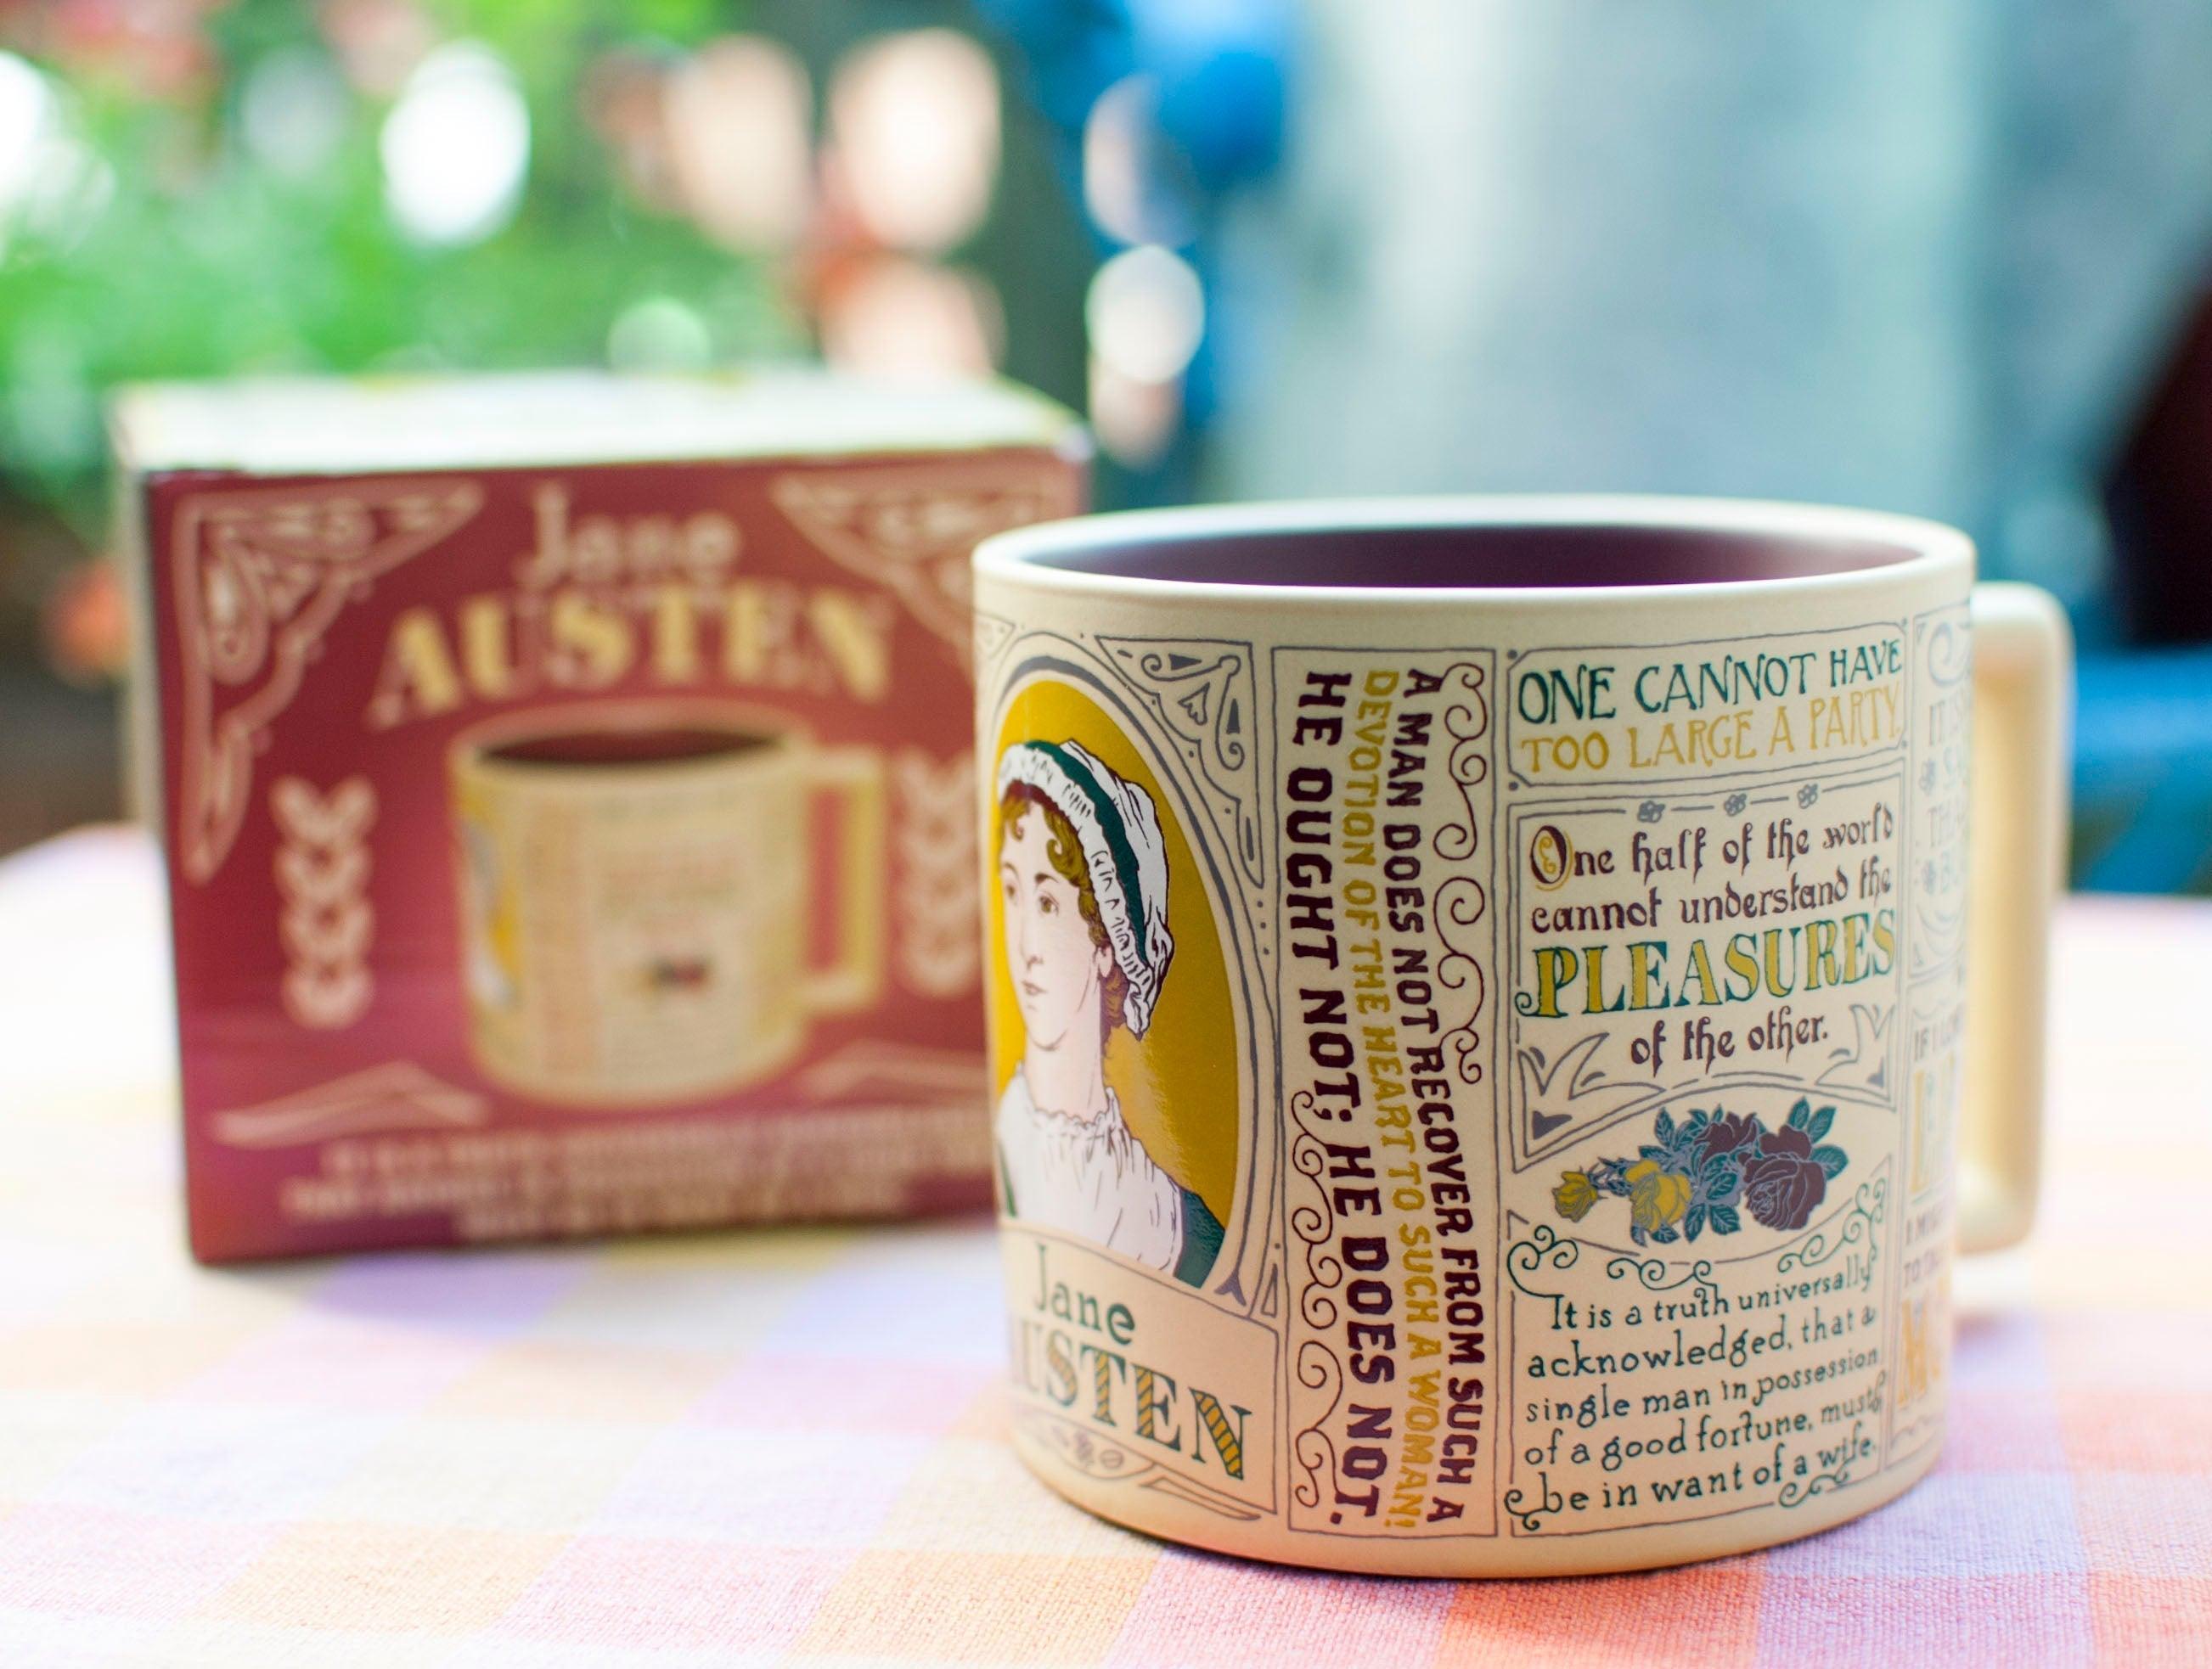 Product photo of Jane Austen Quotes Mug, a novelty gift manufactured by The Unemployed Philosophers Guild.